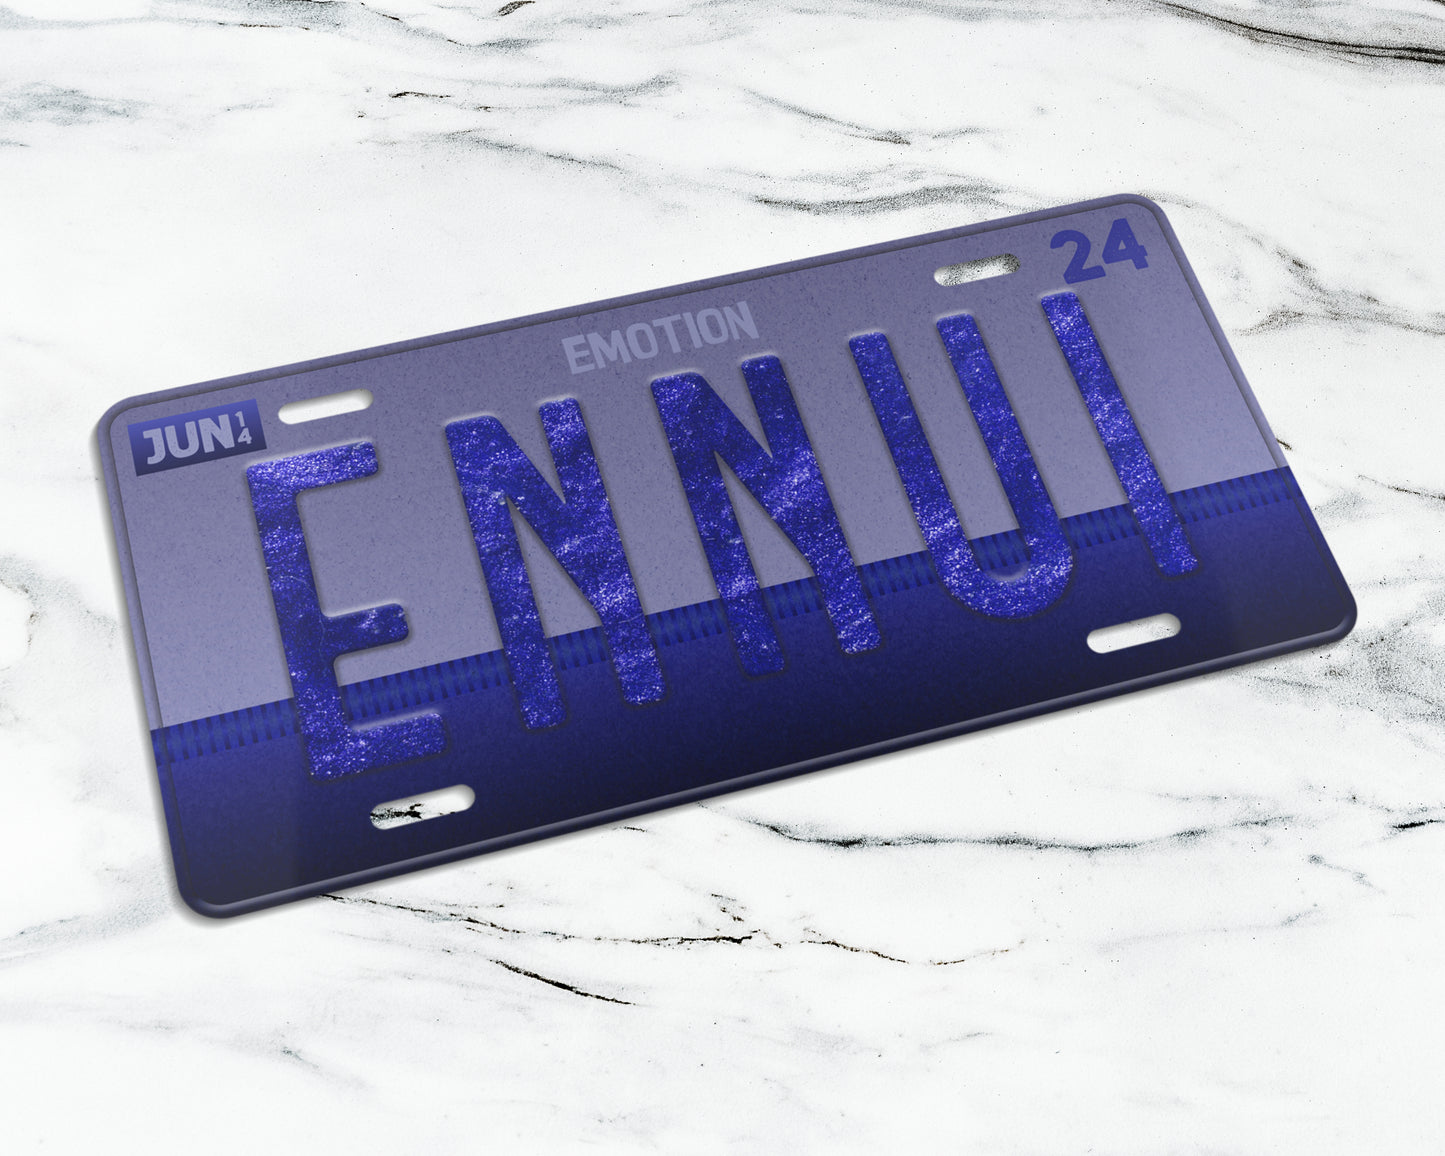 Set of the emotions license plate